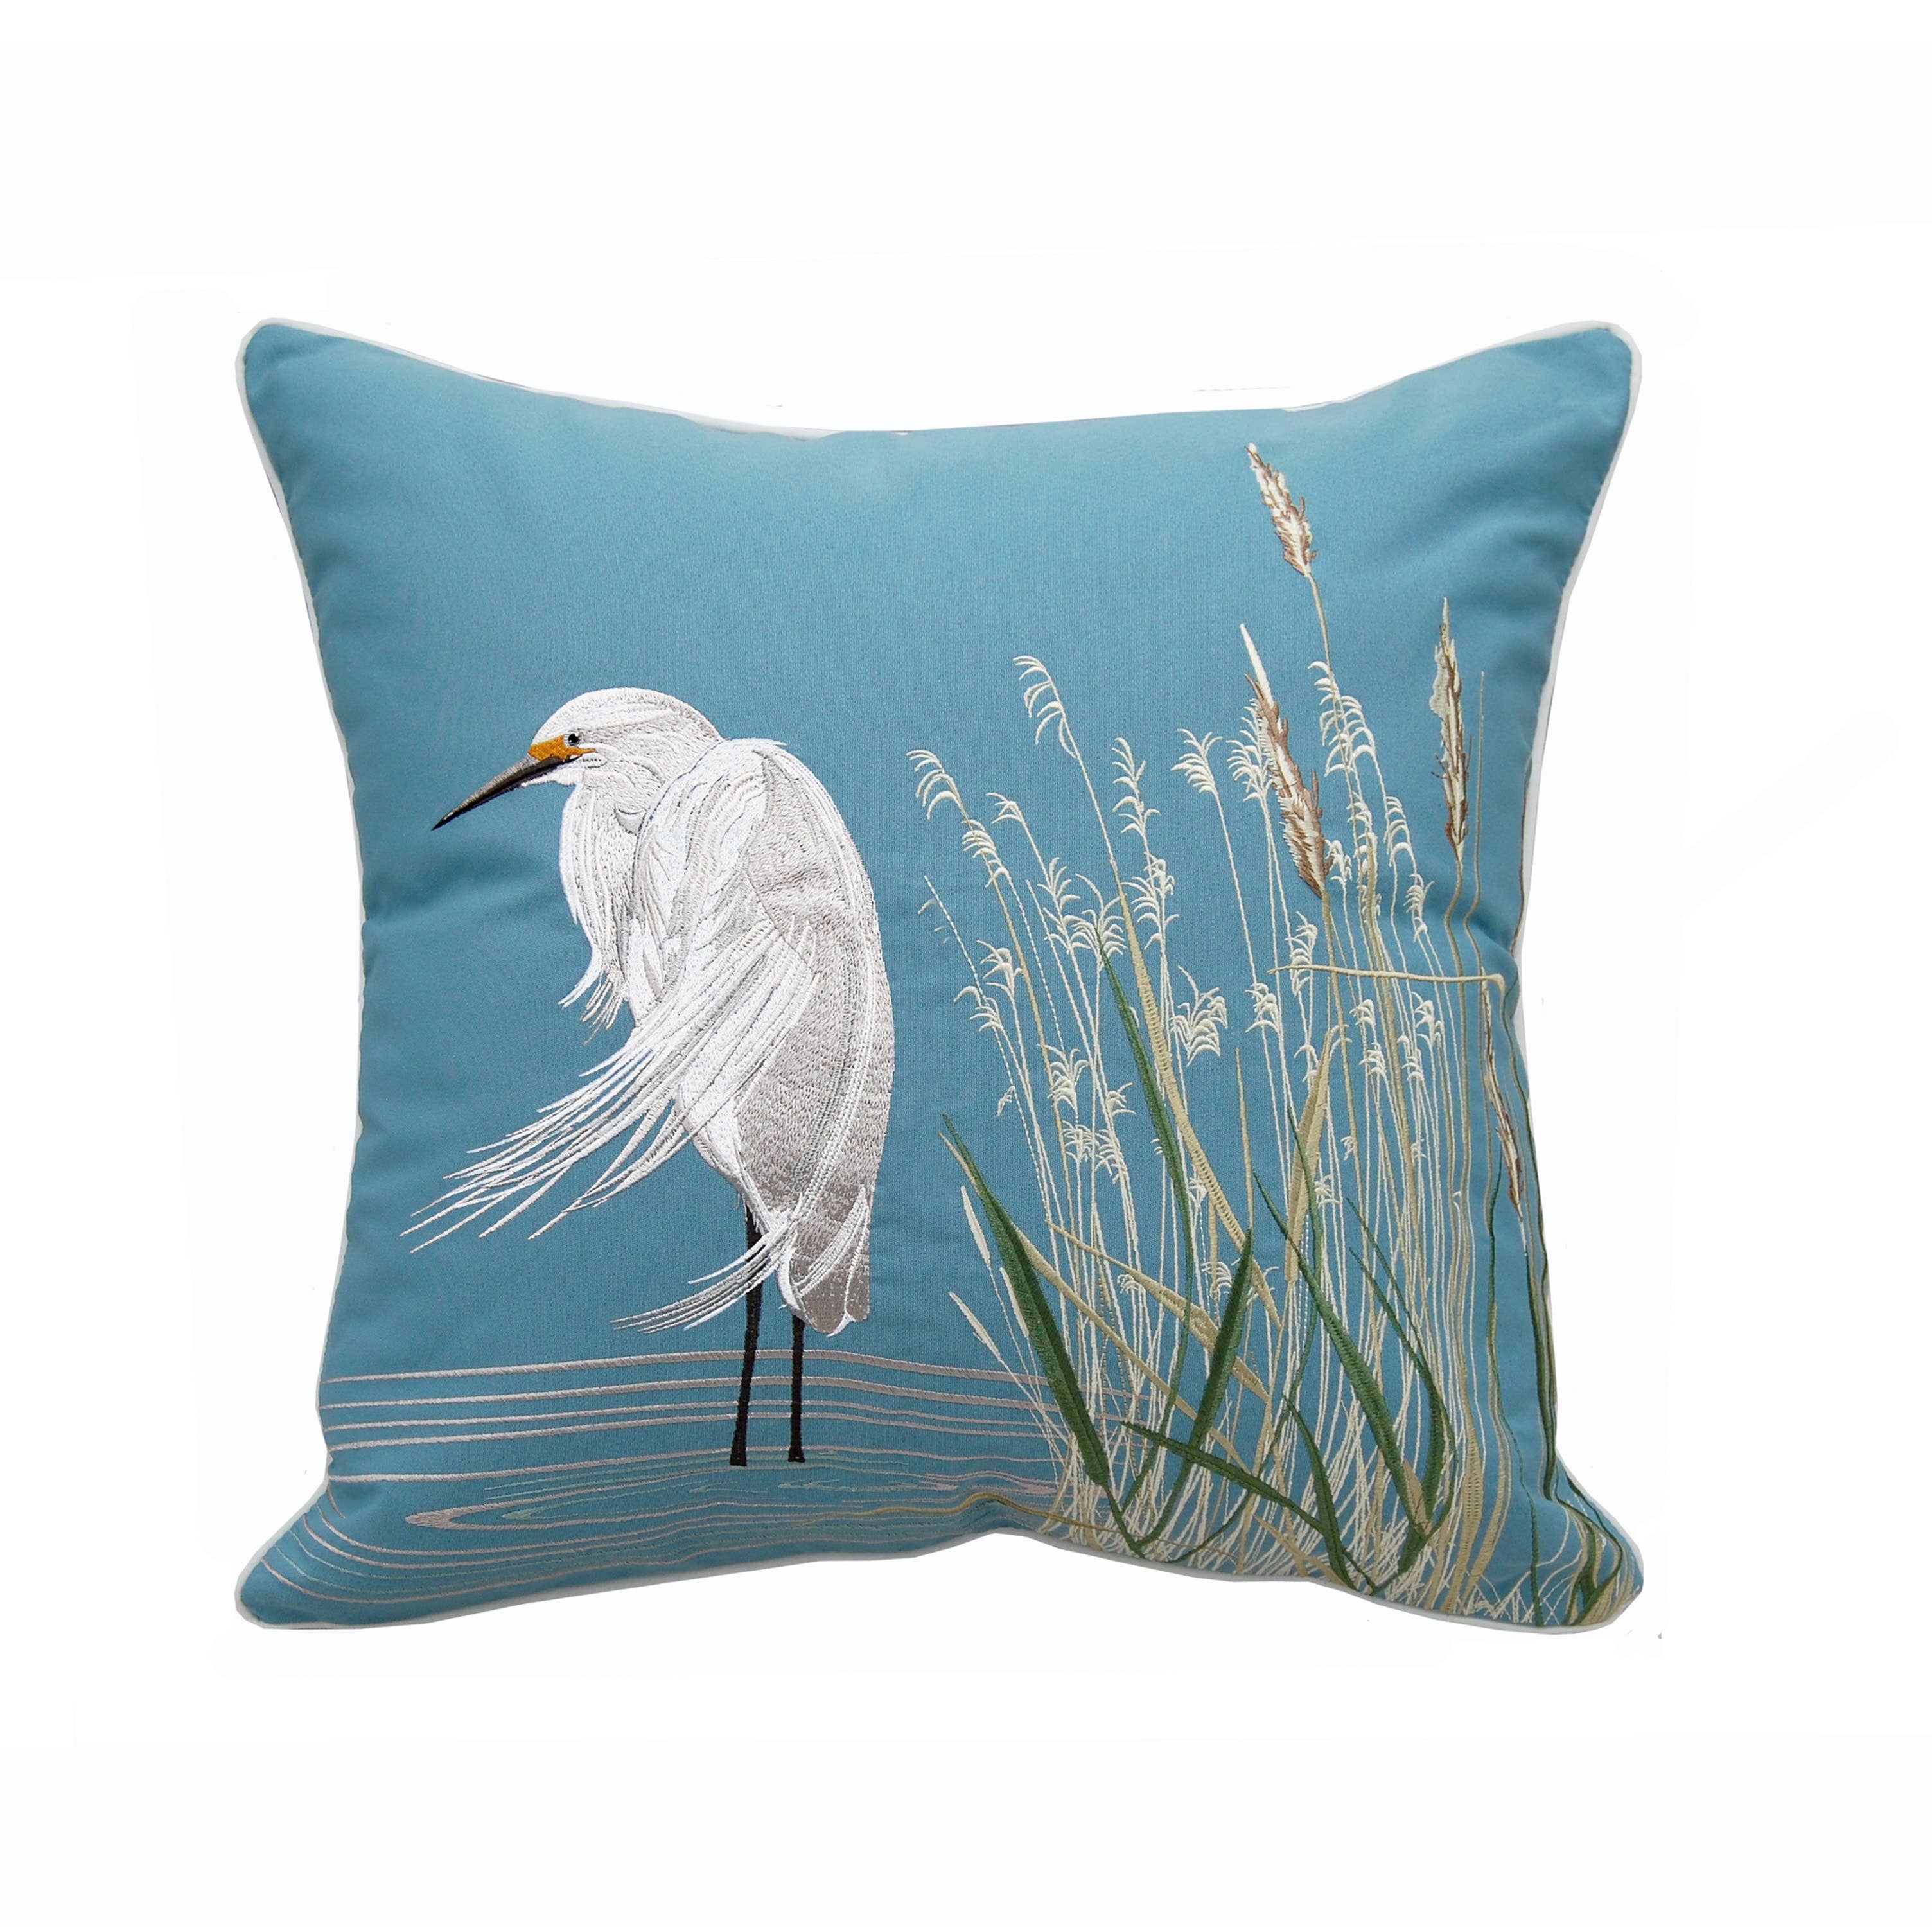 Throw Pillow Indoor Outdoor Patio Threshold Pelicans Blue New Square Cushion 